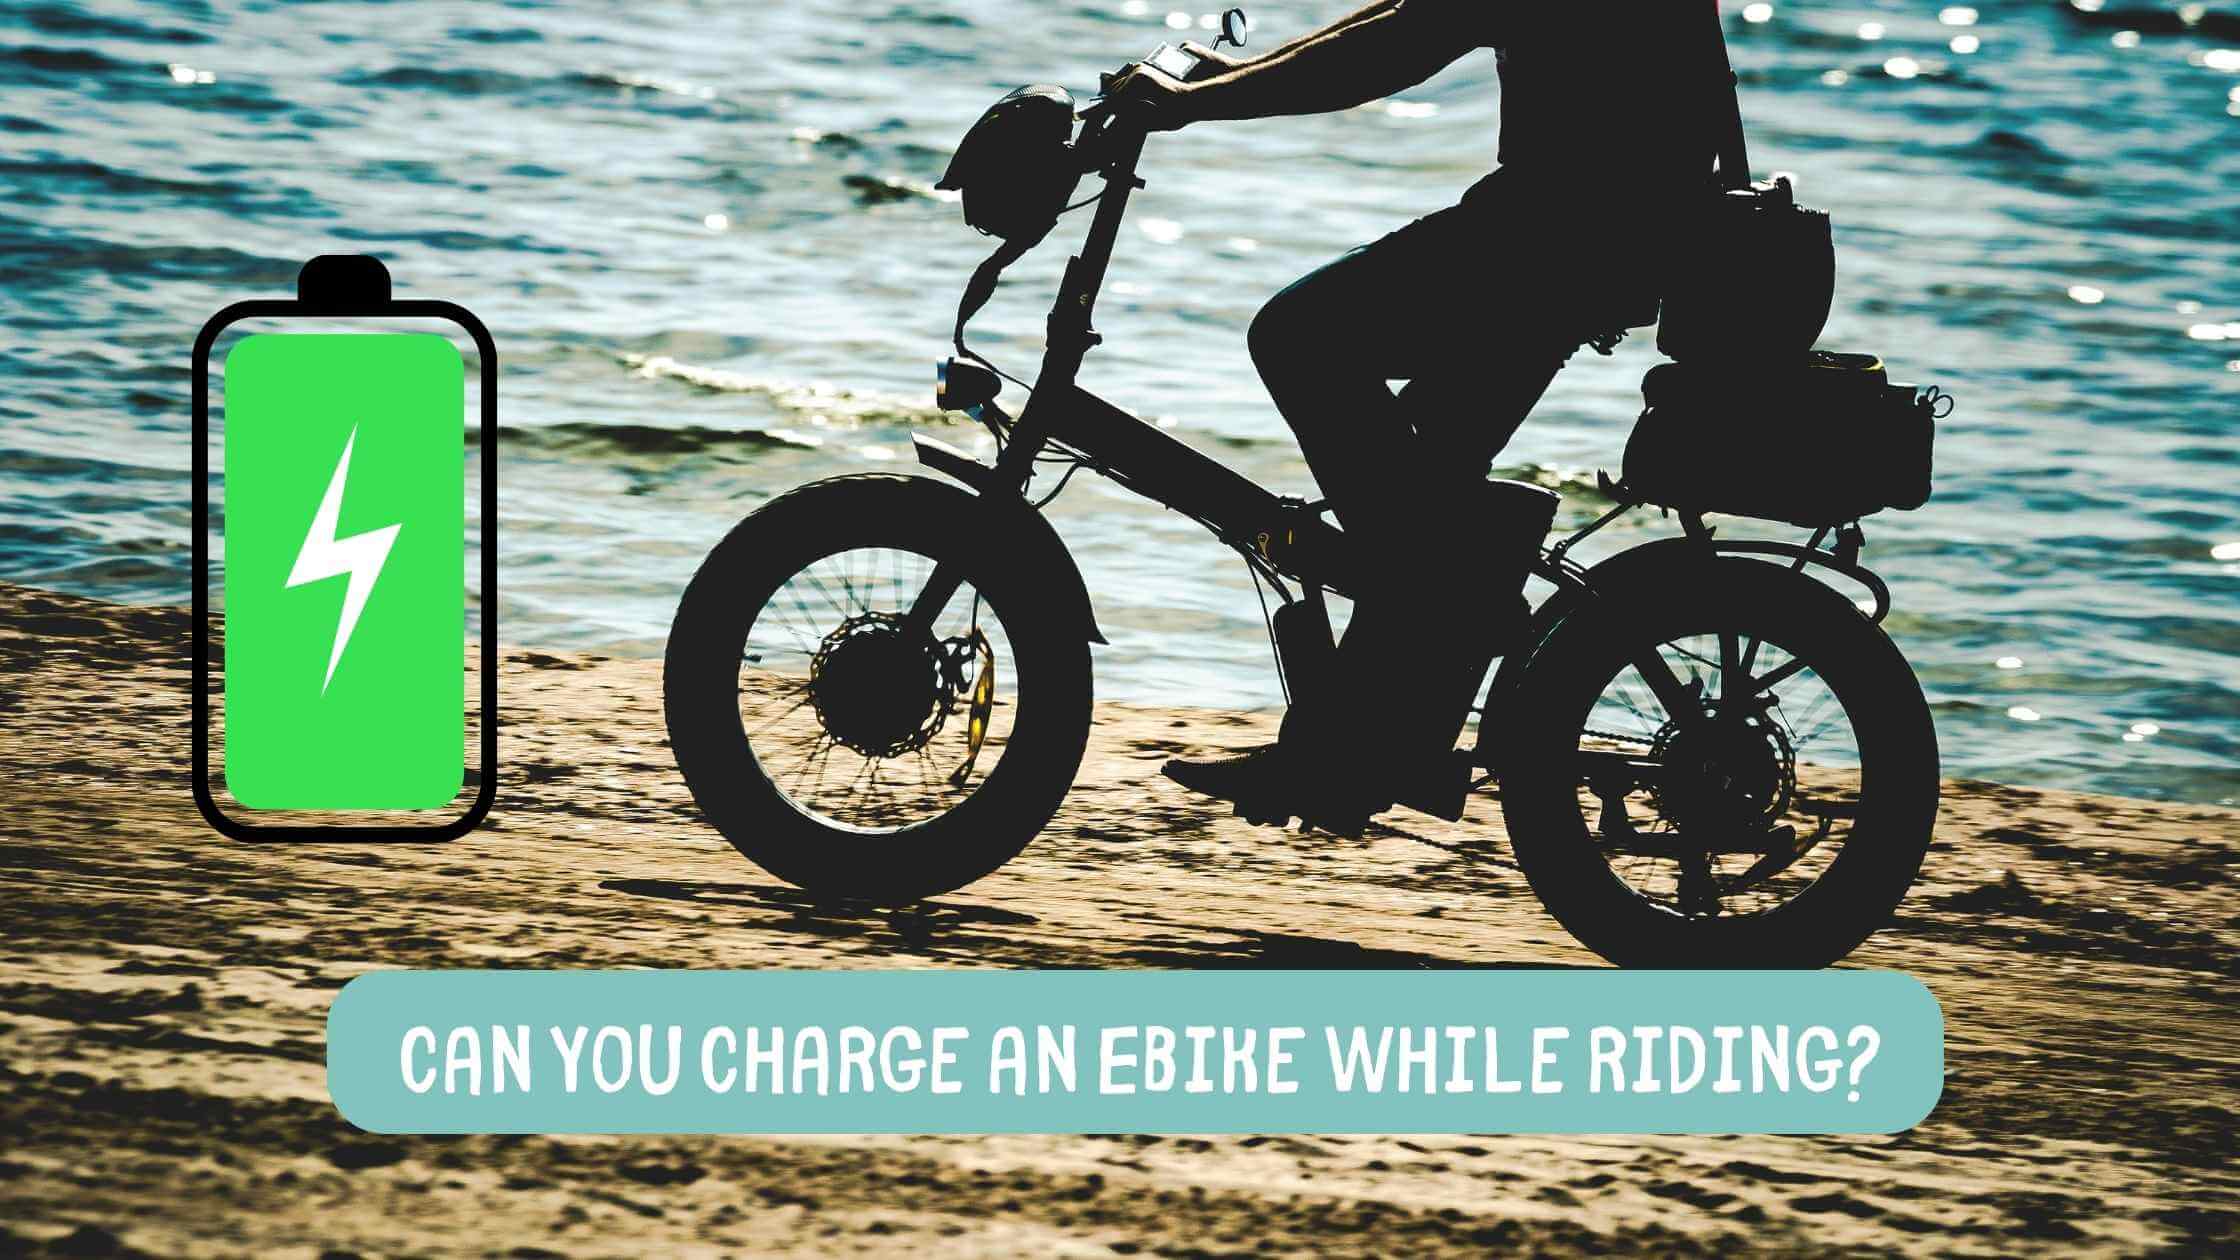 Can You Charge an Ebike While Riding?